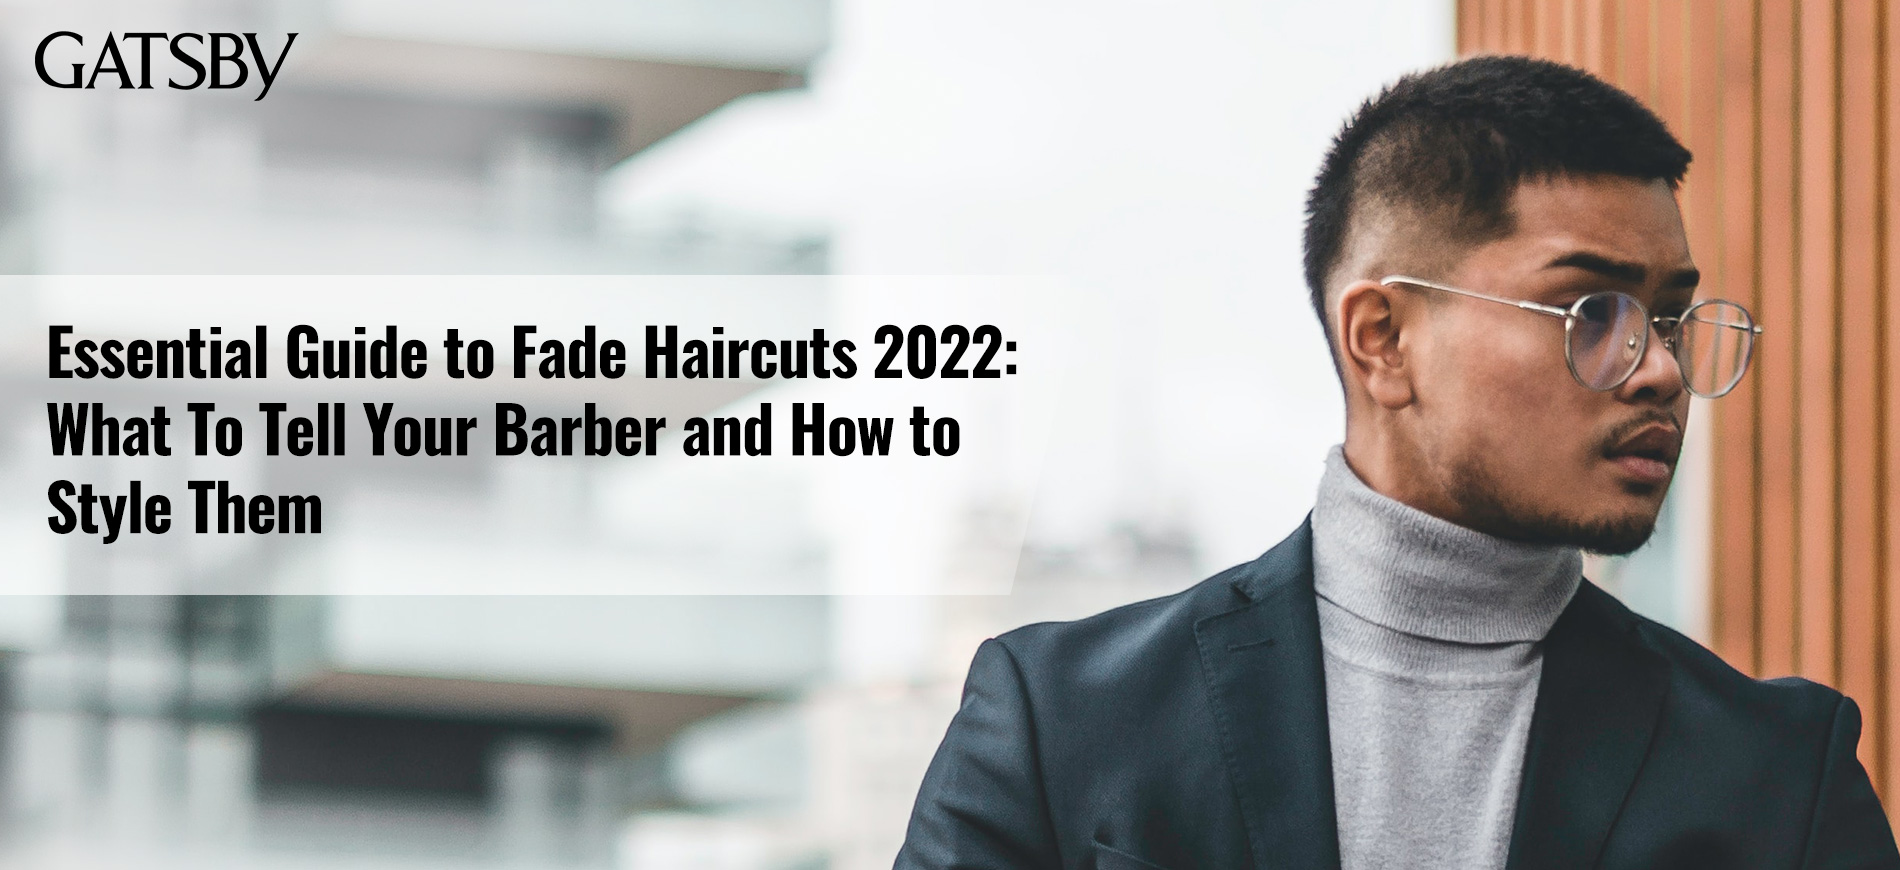 Essential Guide to Fade Haircuts 2022: What To Tell Your Barber and How to Style Them